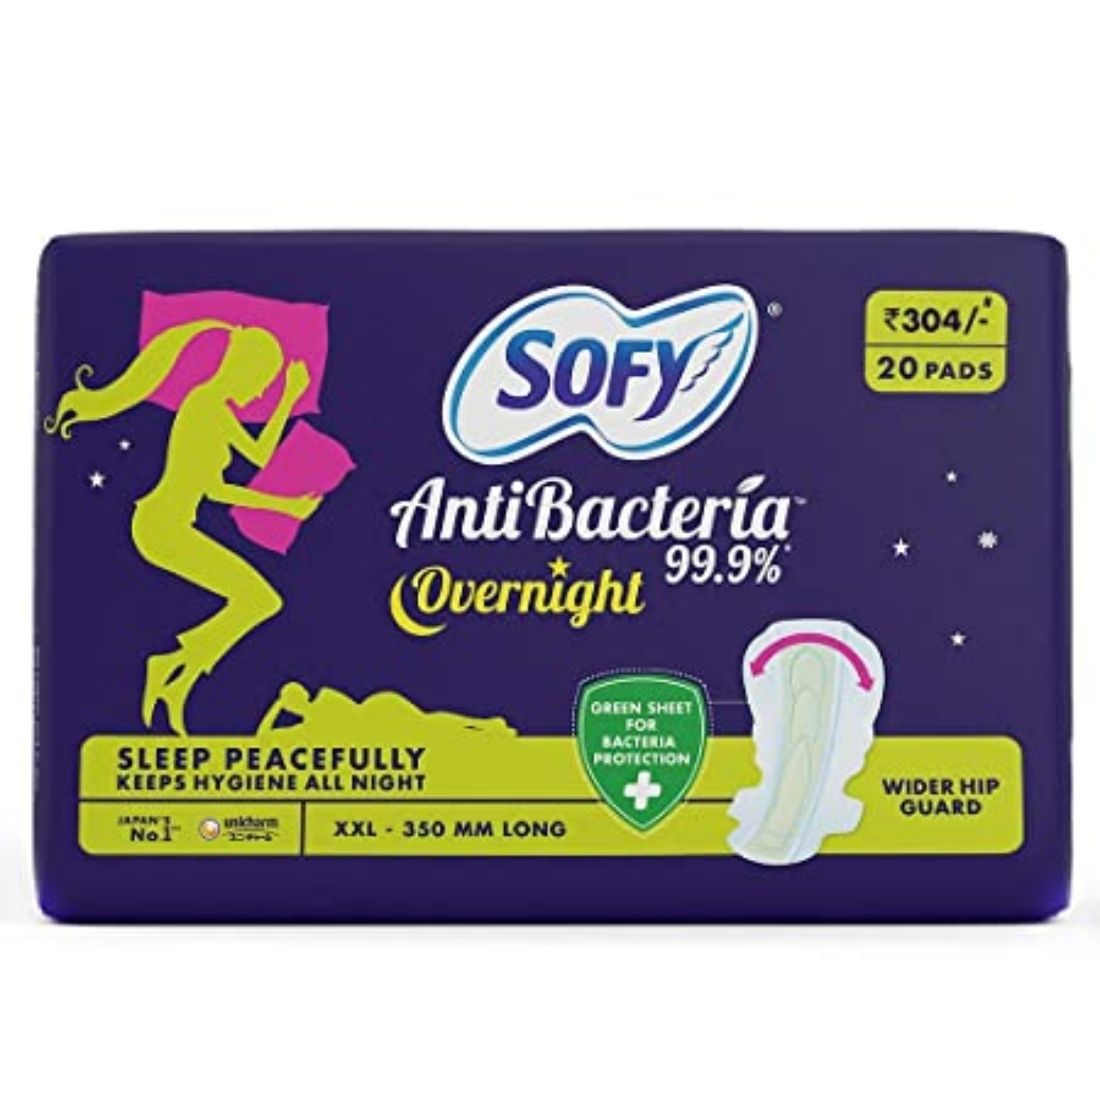 Buy Sofy Antibacteria Overnight Sanitary Napkins that gives 99.9% Bacteria Protection along with longer length and wider hip guard for extra protection